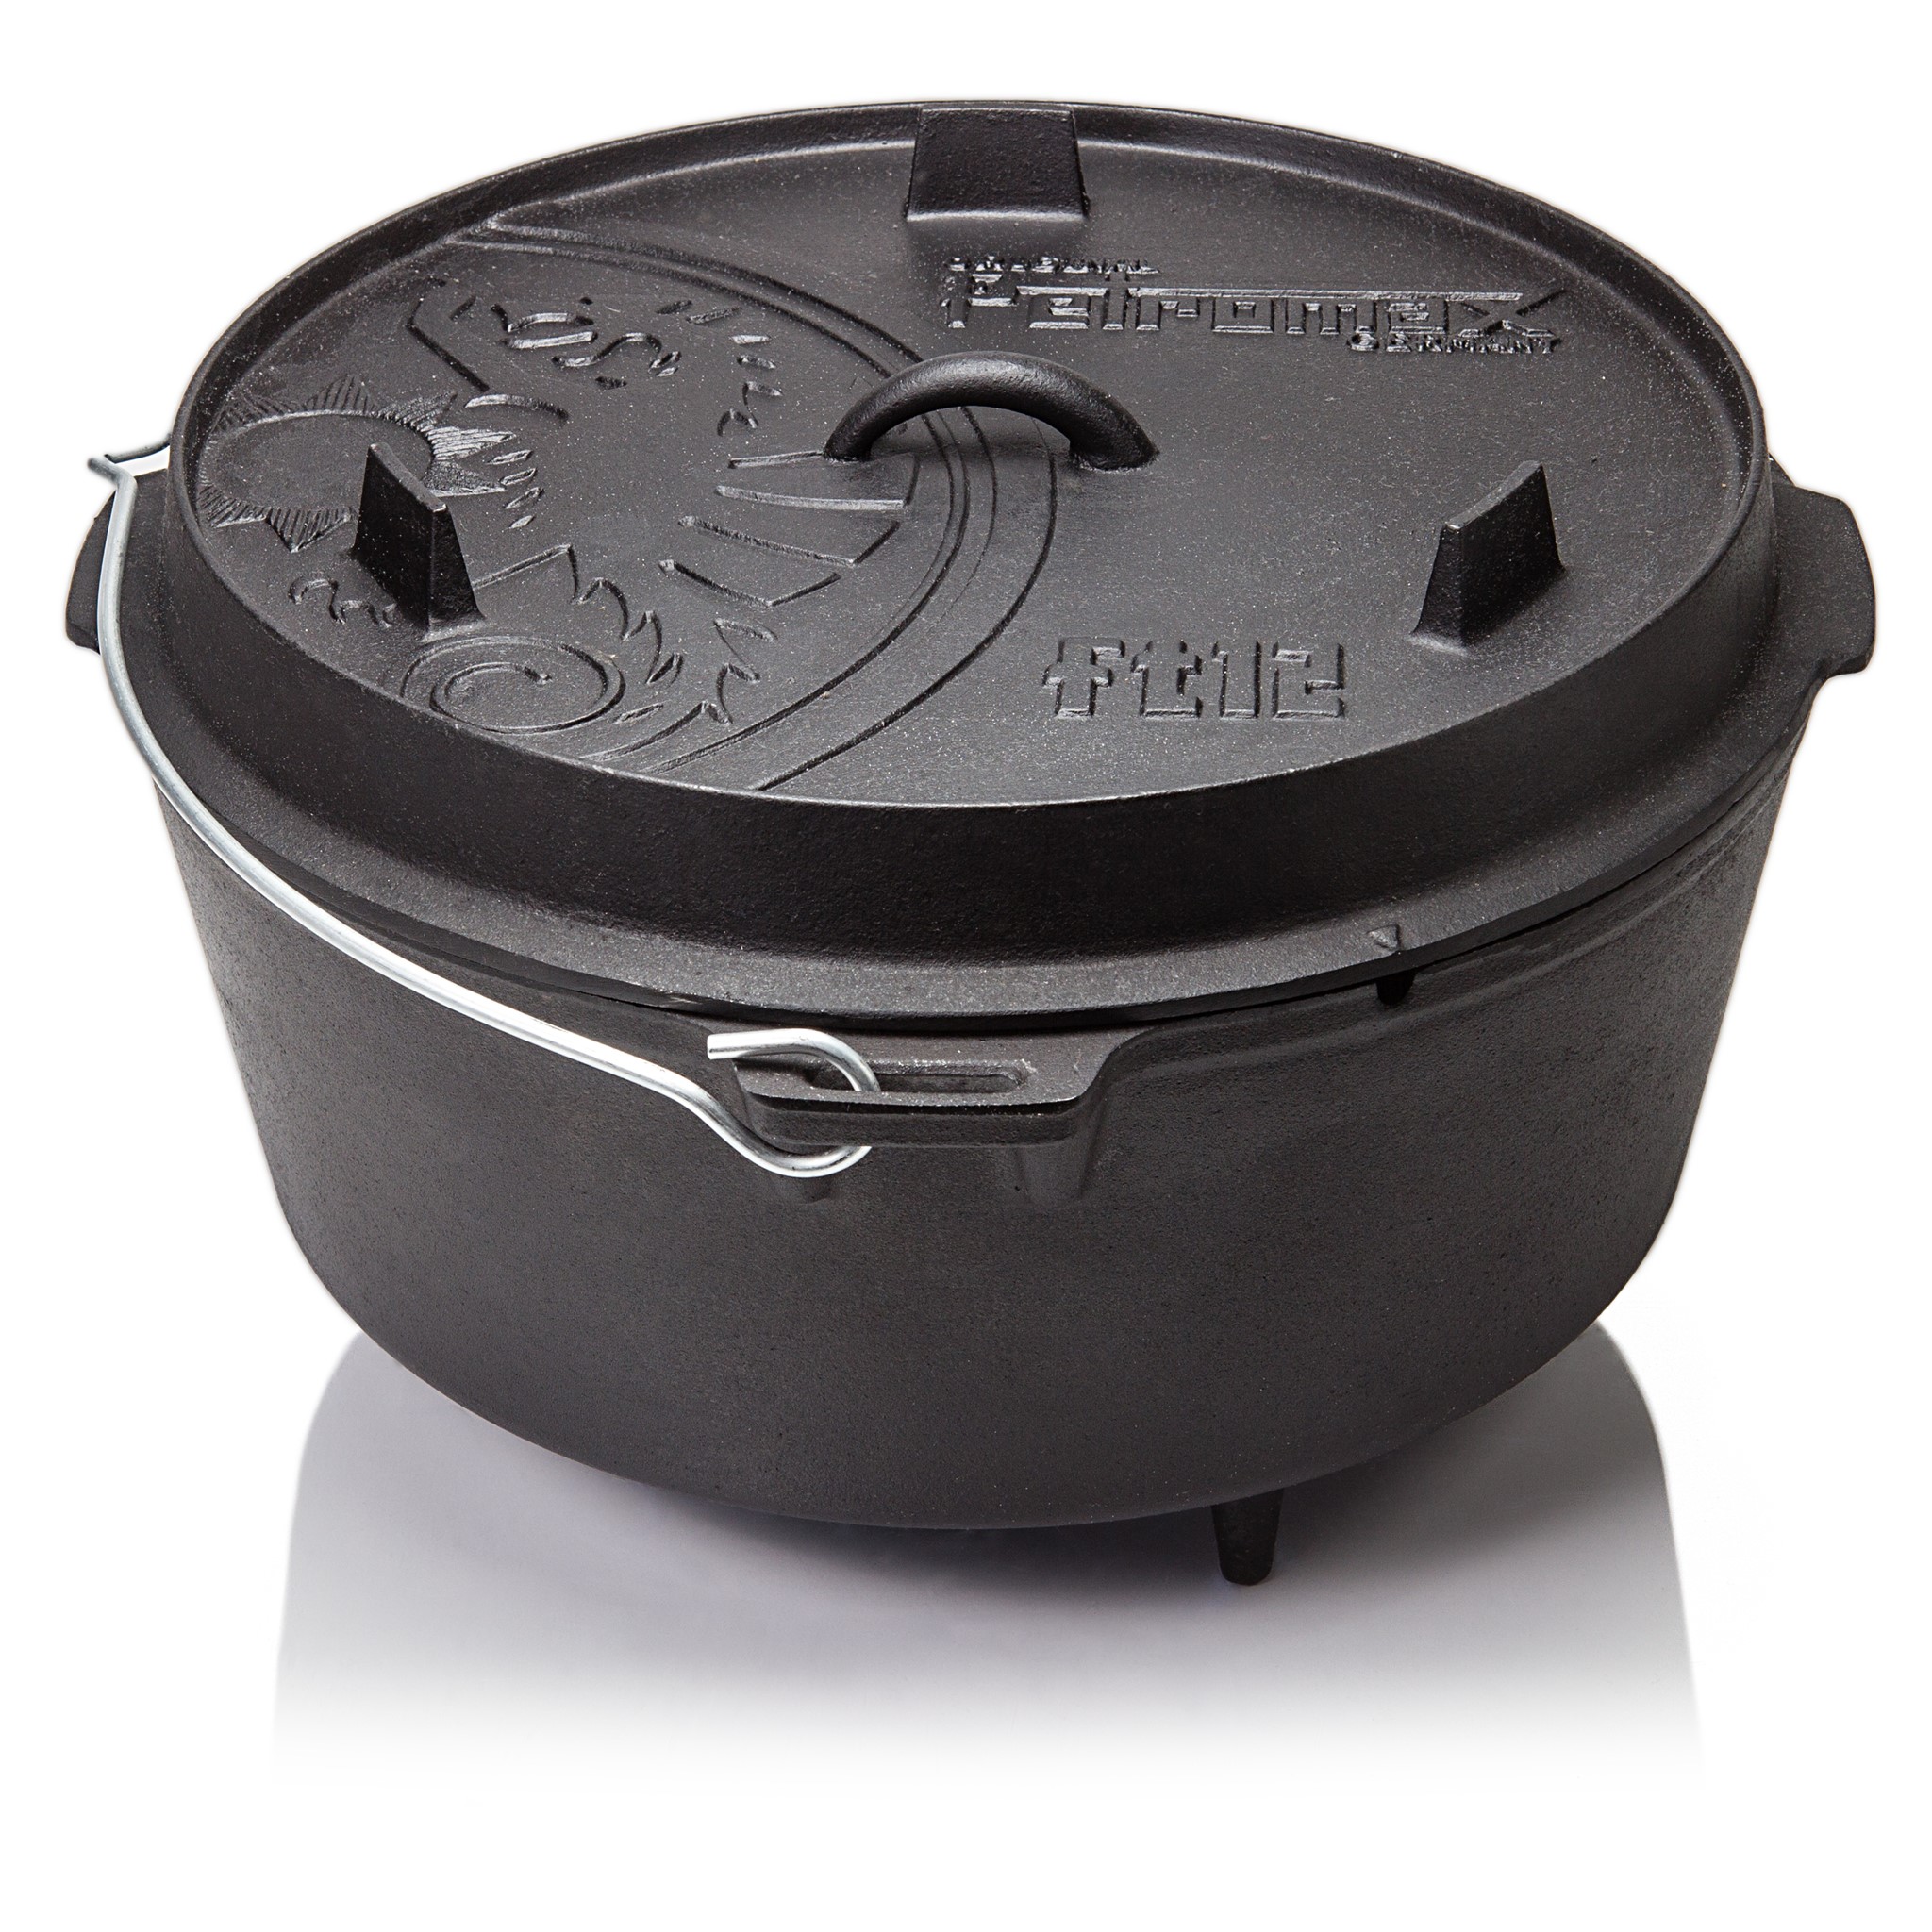 Picture of Petromax - Dutch Oven FT12 10.8 Liter (with Feet)